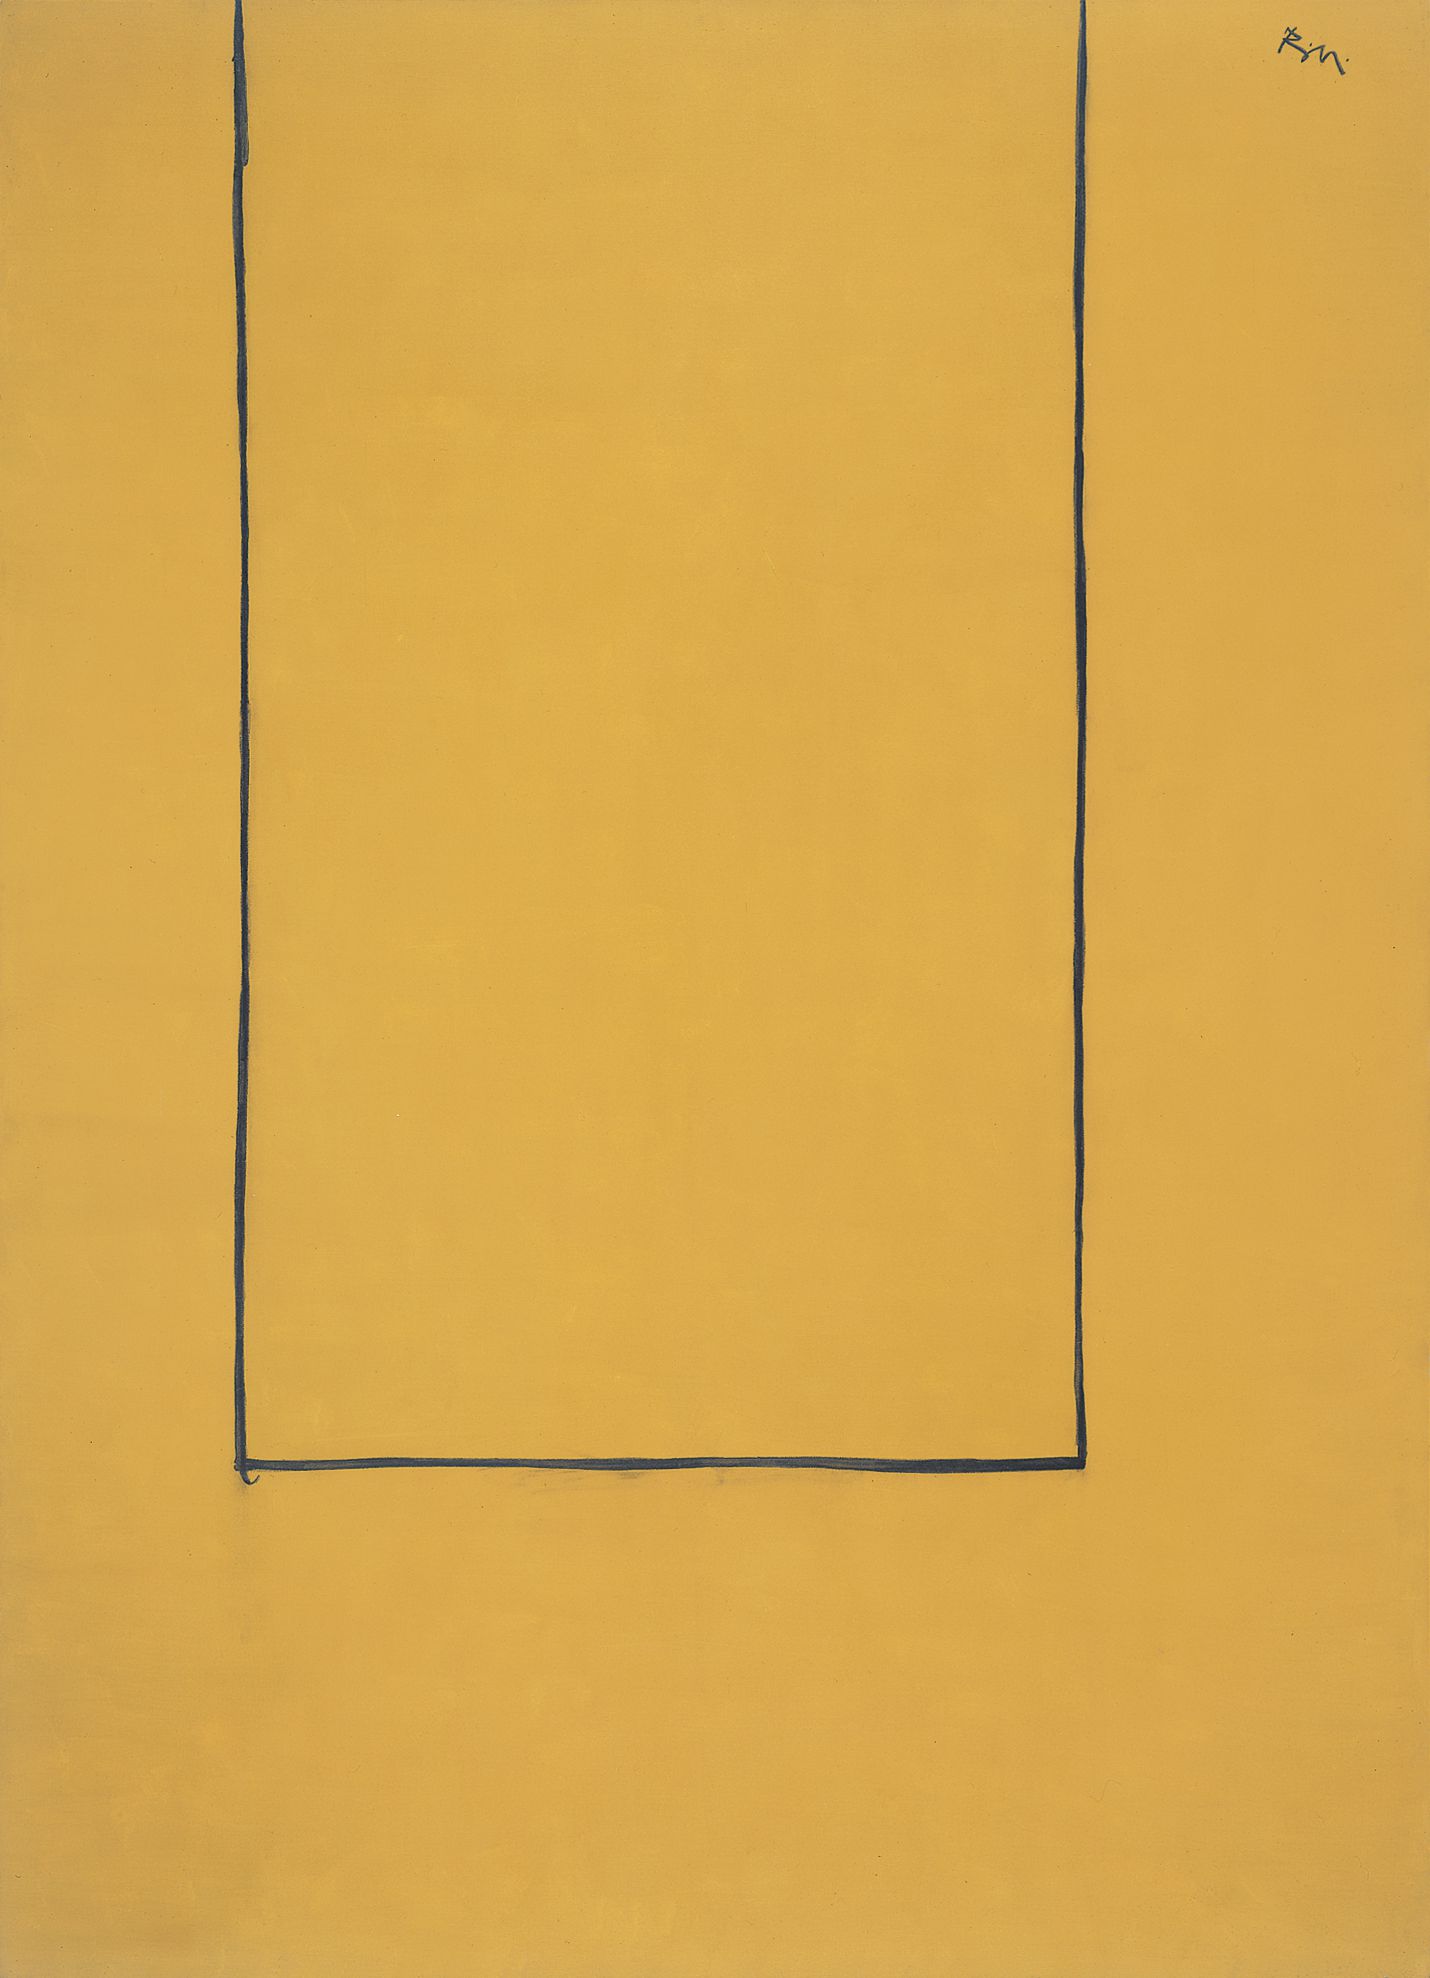 Open No. 14: In Ochre with Charcoal Line, 1967. Acrylic and charcoal on canvas, 114 x 69 inches (289.6 x 175.3 cm)